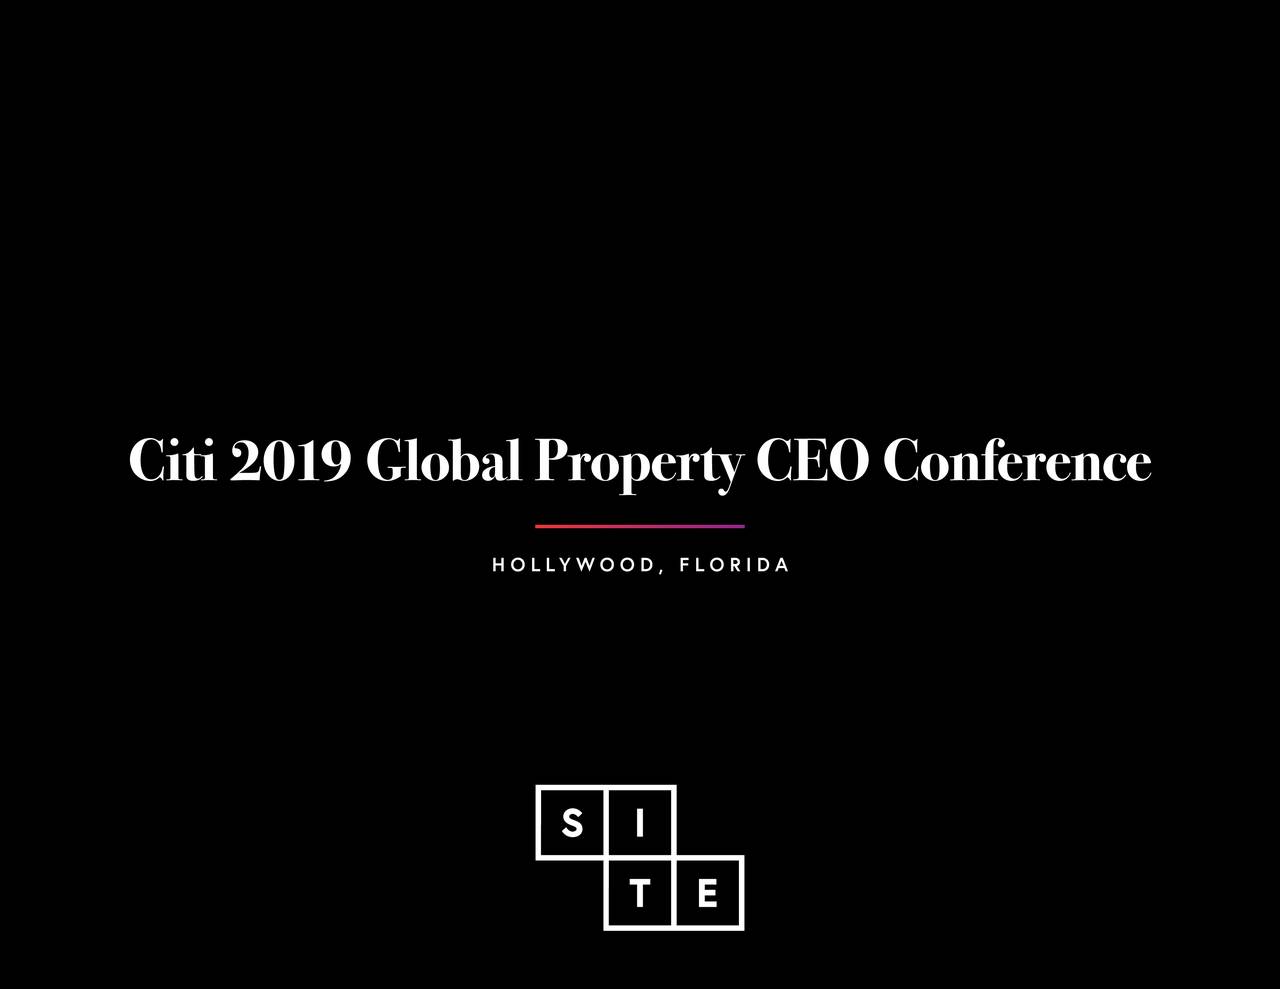 SITE Centers (SITC) To Present At Citi's Global Property CEO Conference